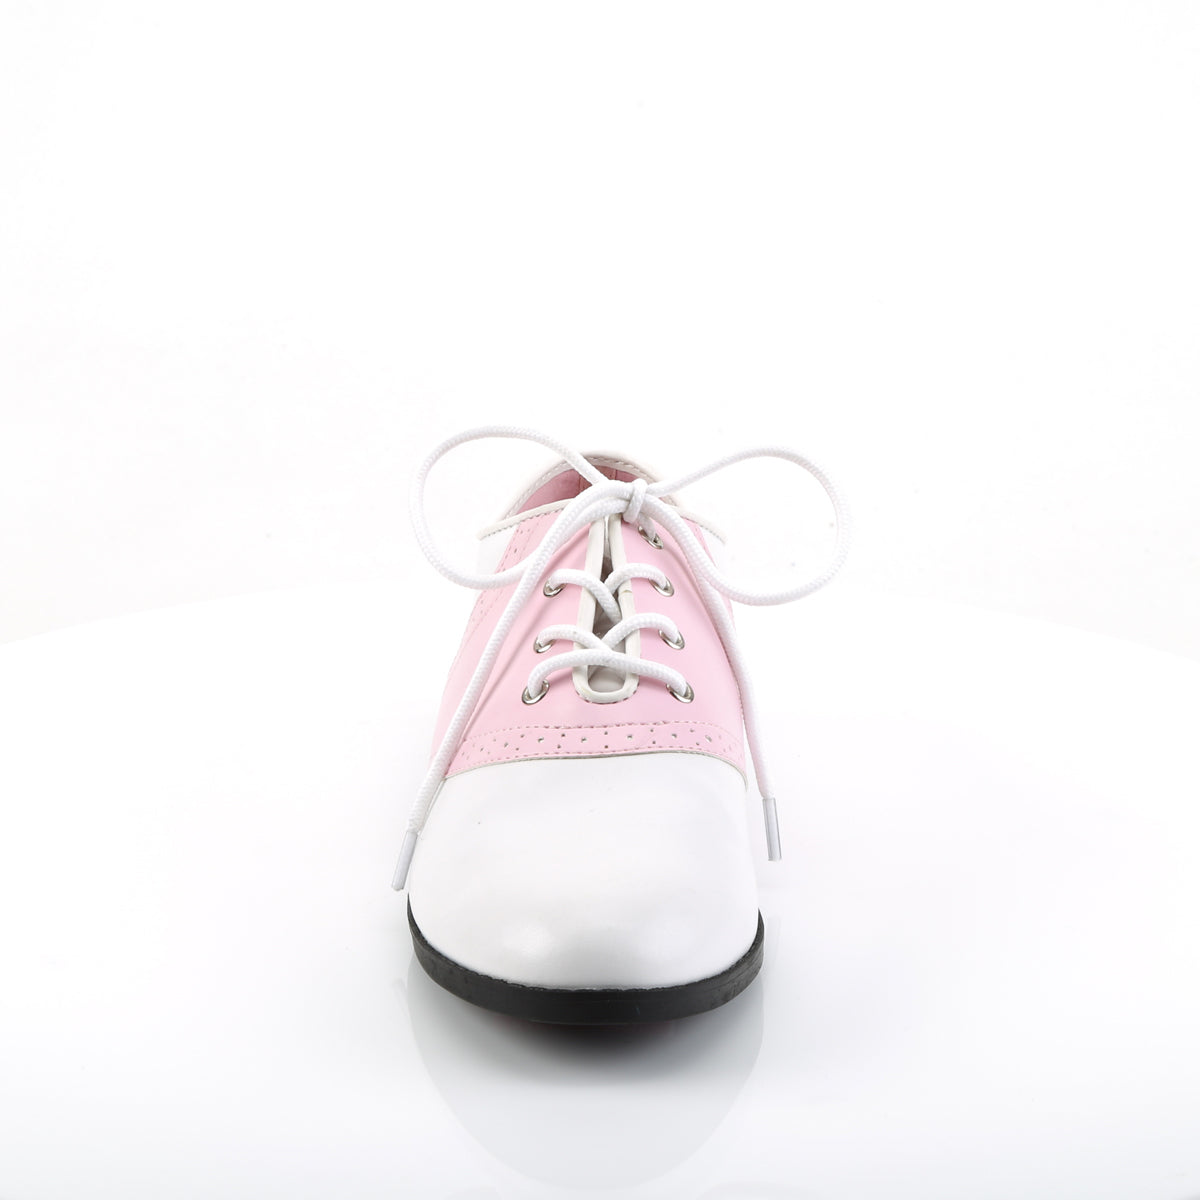 BRAND NEW Bait footwear pink and cream saddle oxfords heels size 10 womens  💖